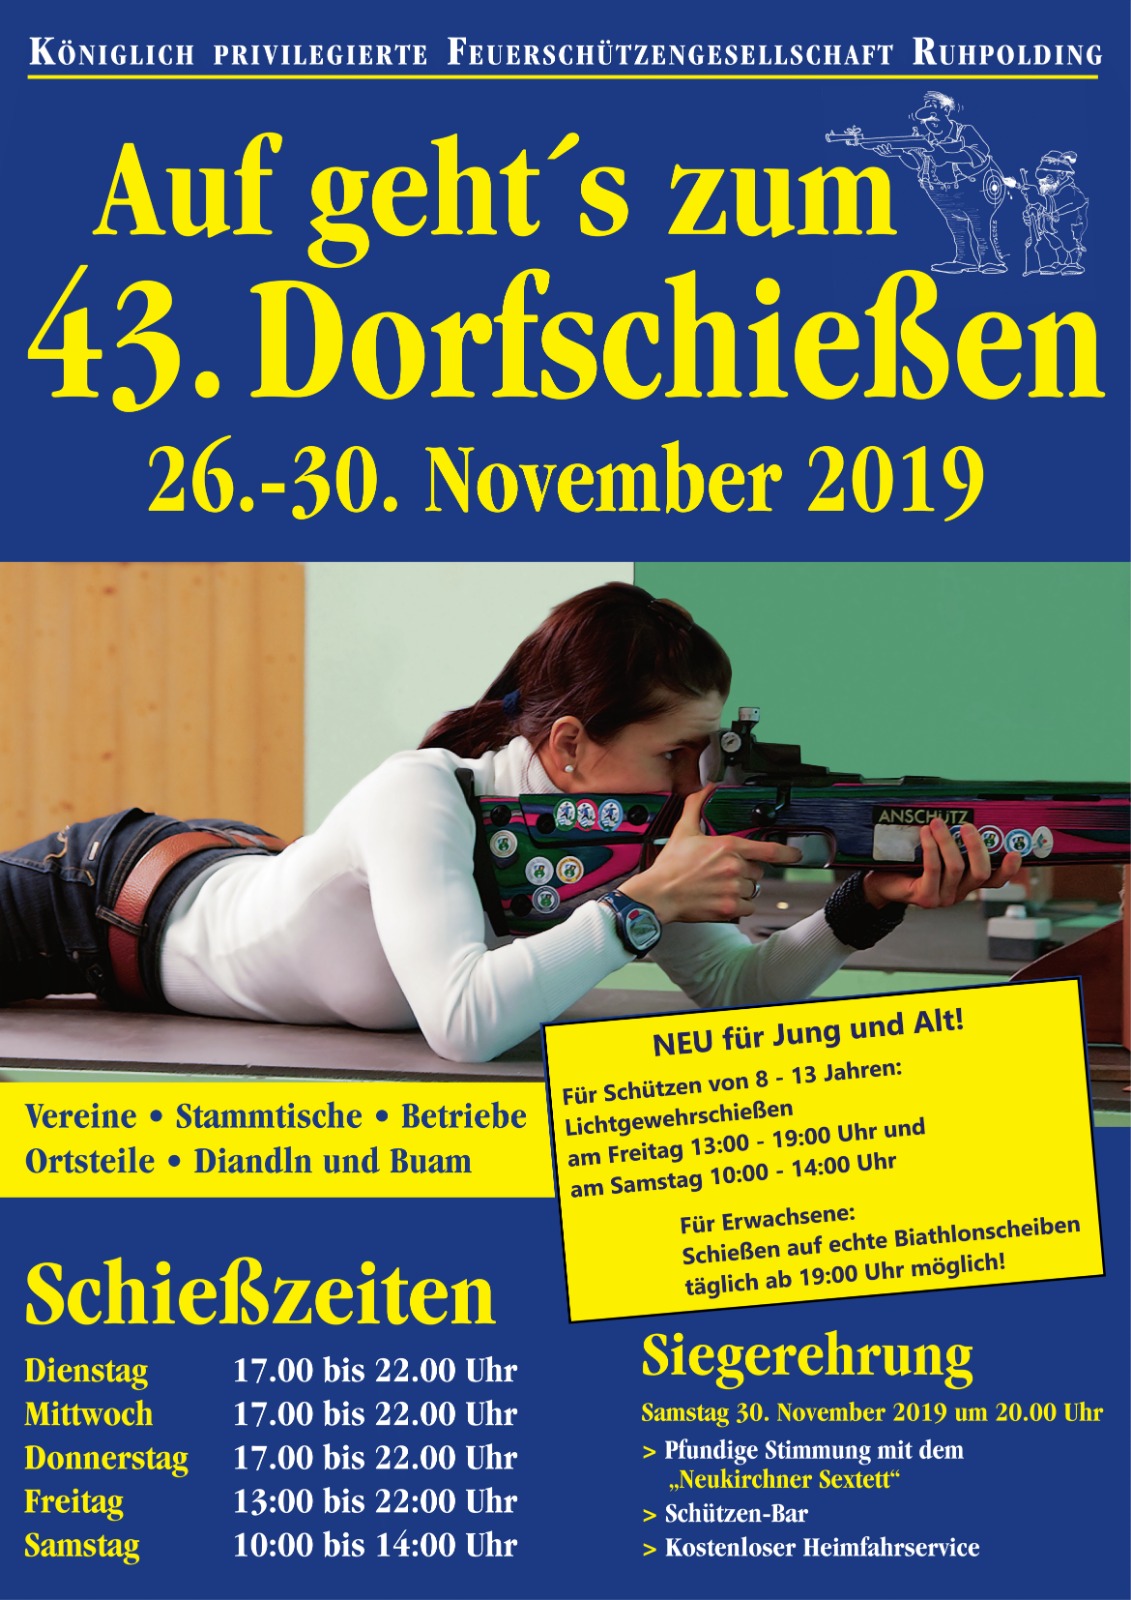 You are currently viewing 43. Dorfschießen